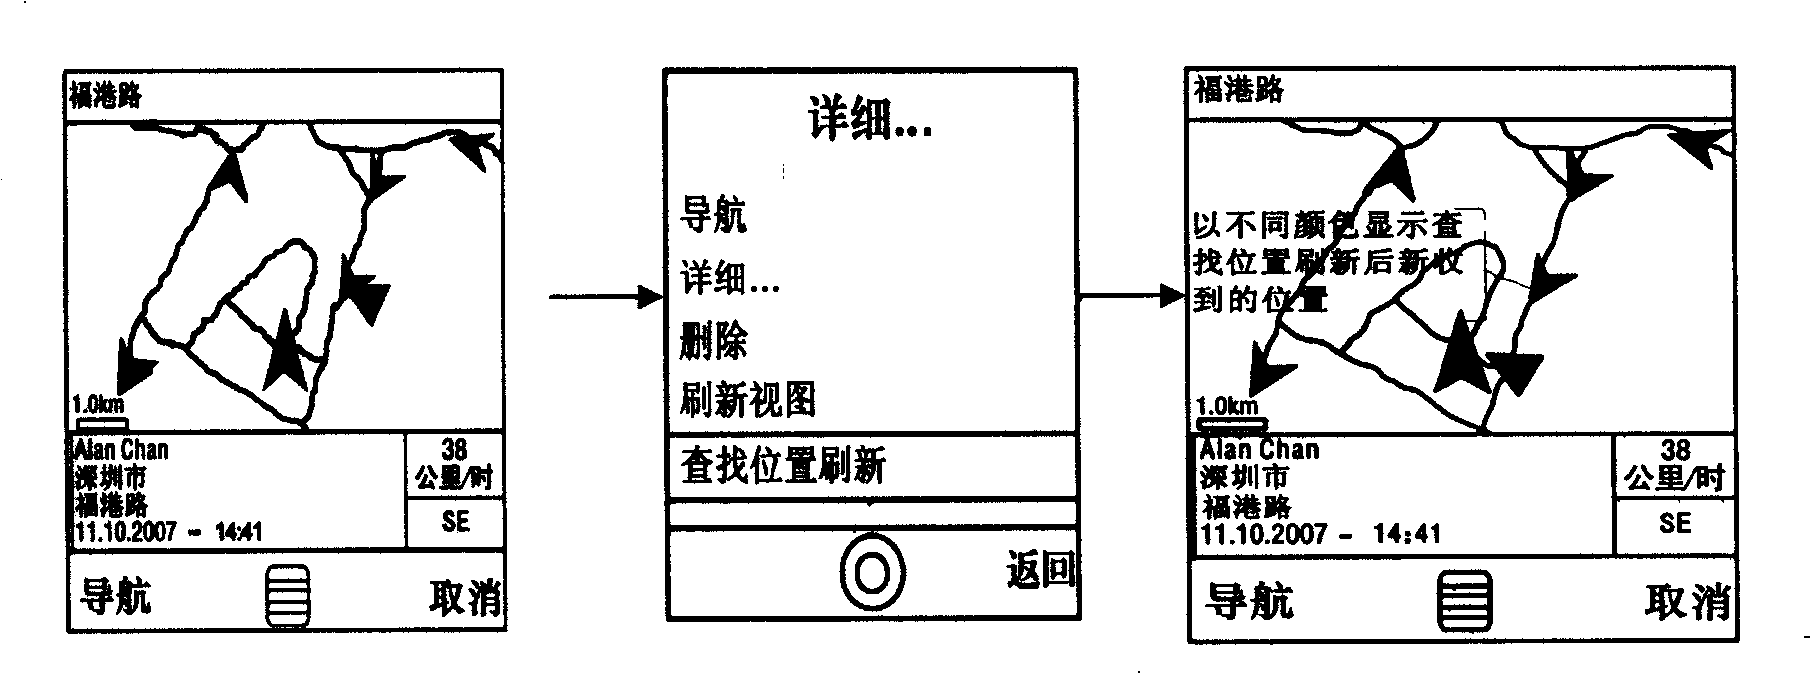 Method and apparatus related to dynamic navigation in navigation